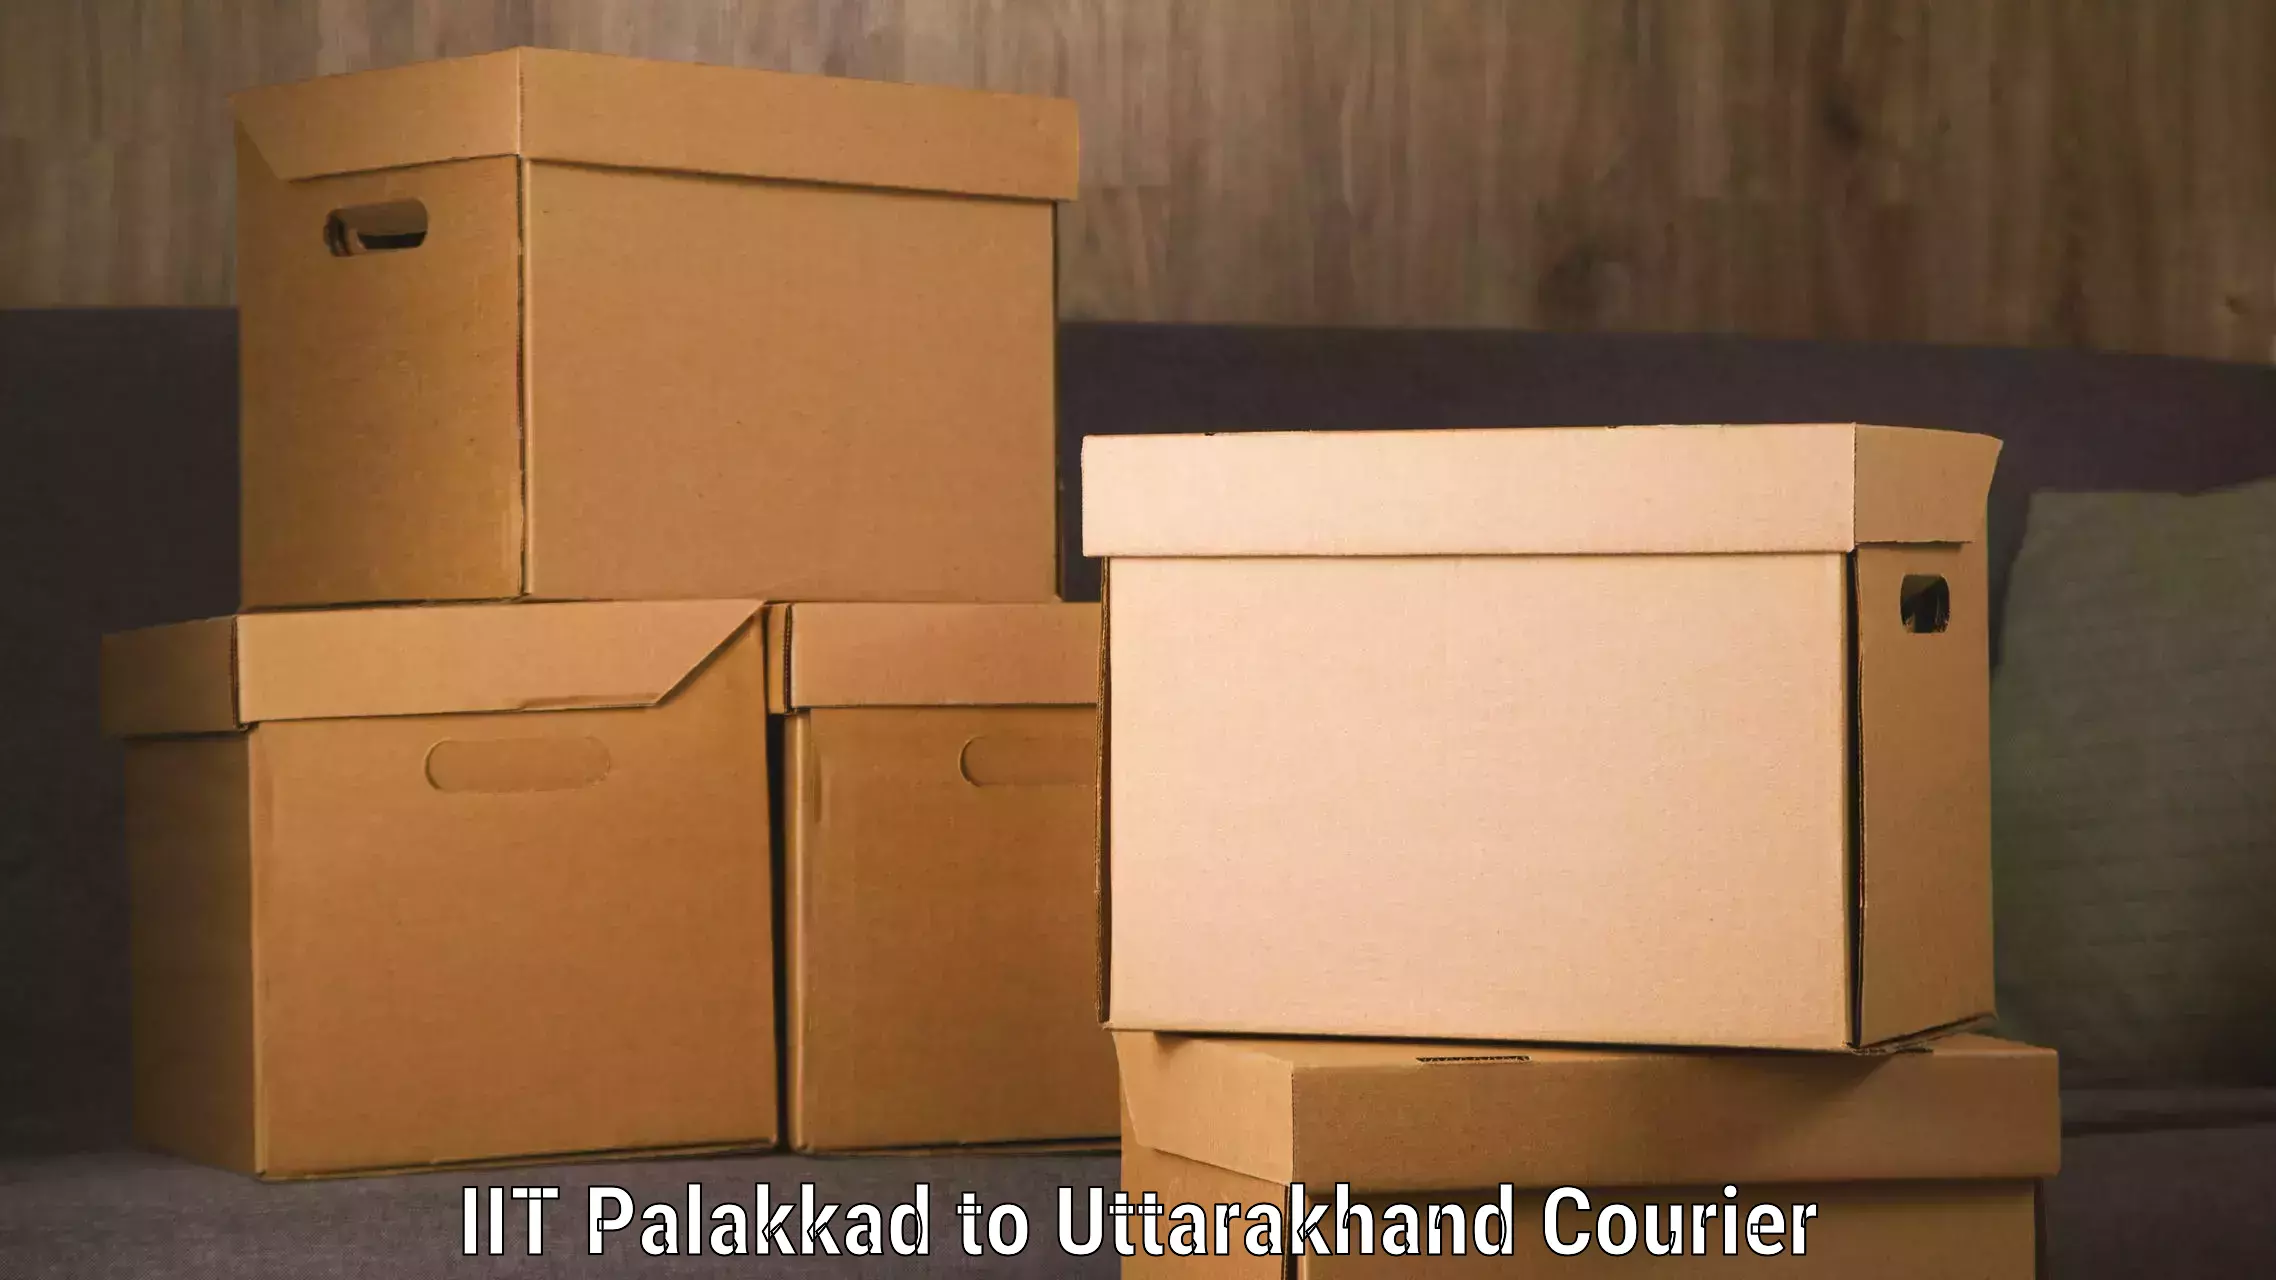 Next-day delivery options IIT Palakkad to Dehradun